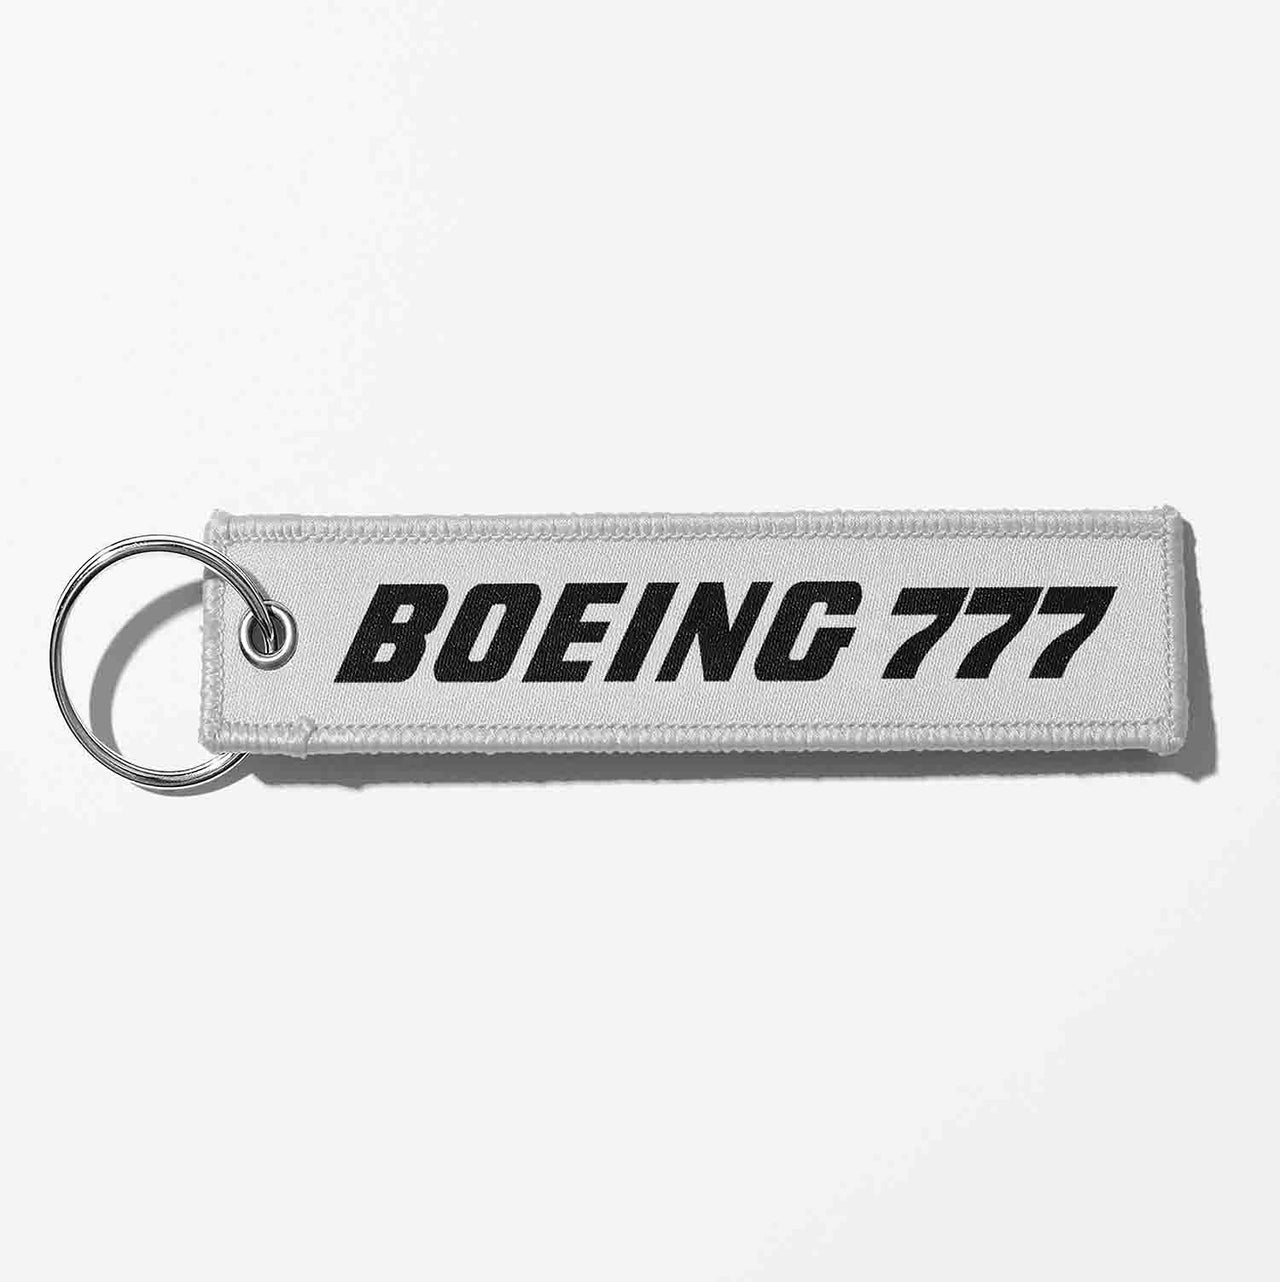 Boeing 777 & Text Designed Key Chains